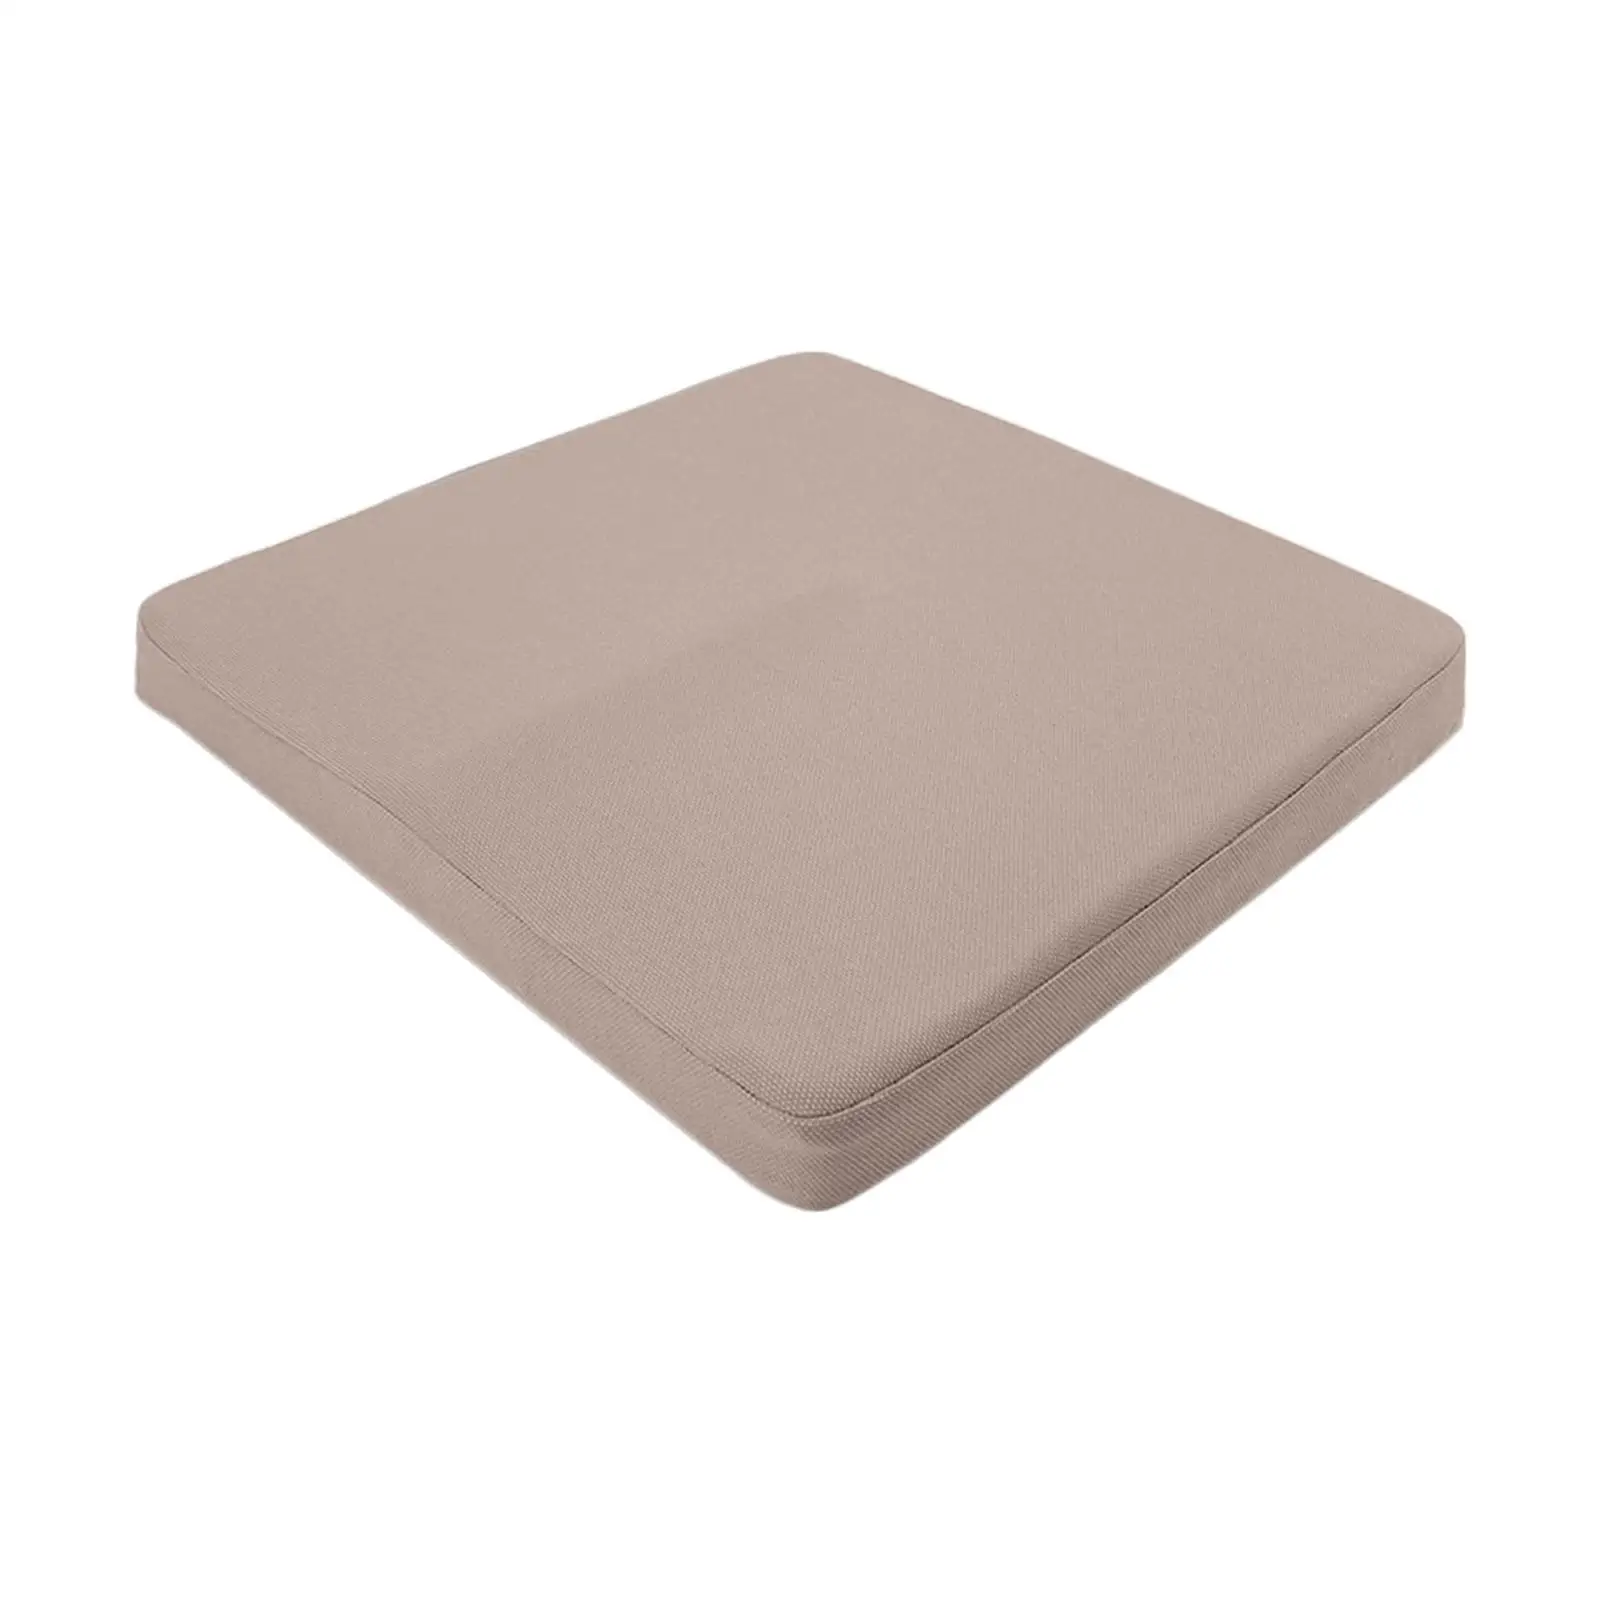 Chair Pad Comfortable Nonslip Back Ergonomic Thicken Sitting Pad Memory Foam Seat Cushion for Office Home Dining Chair